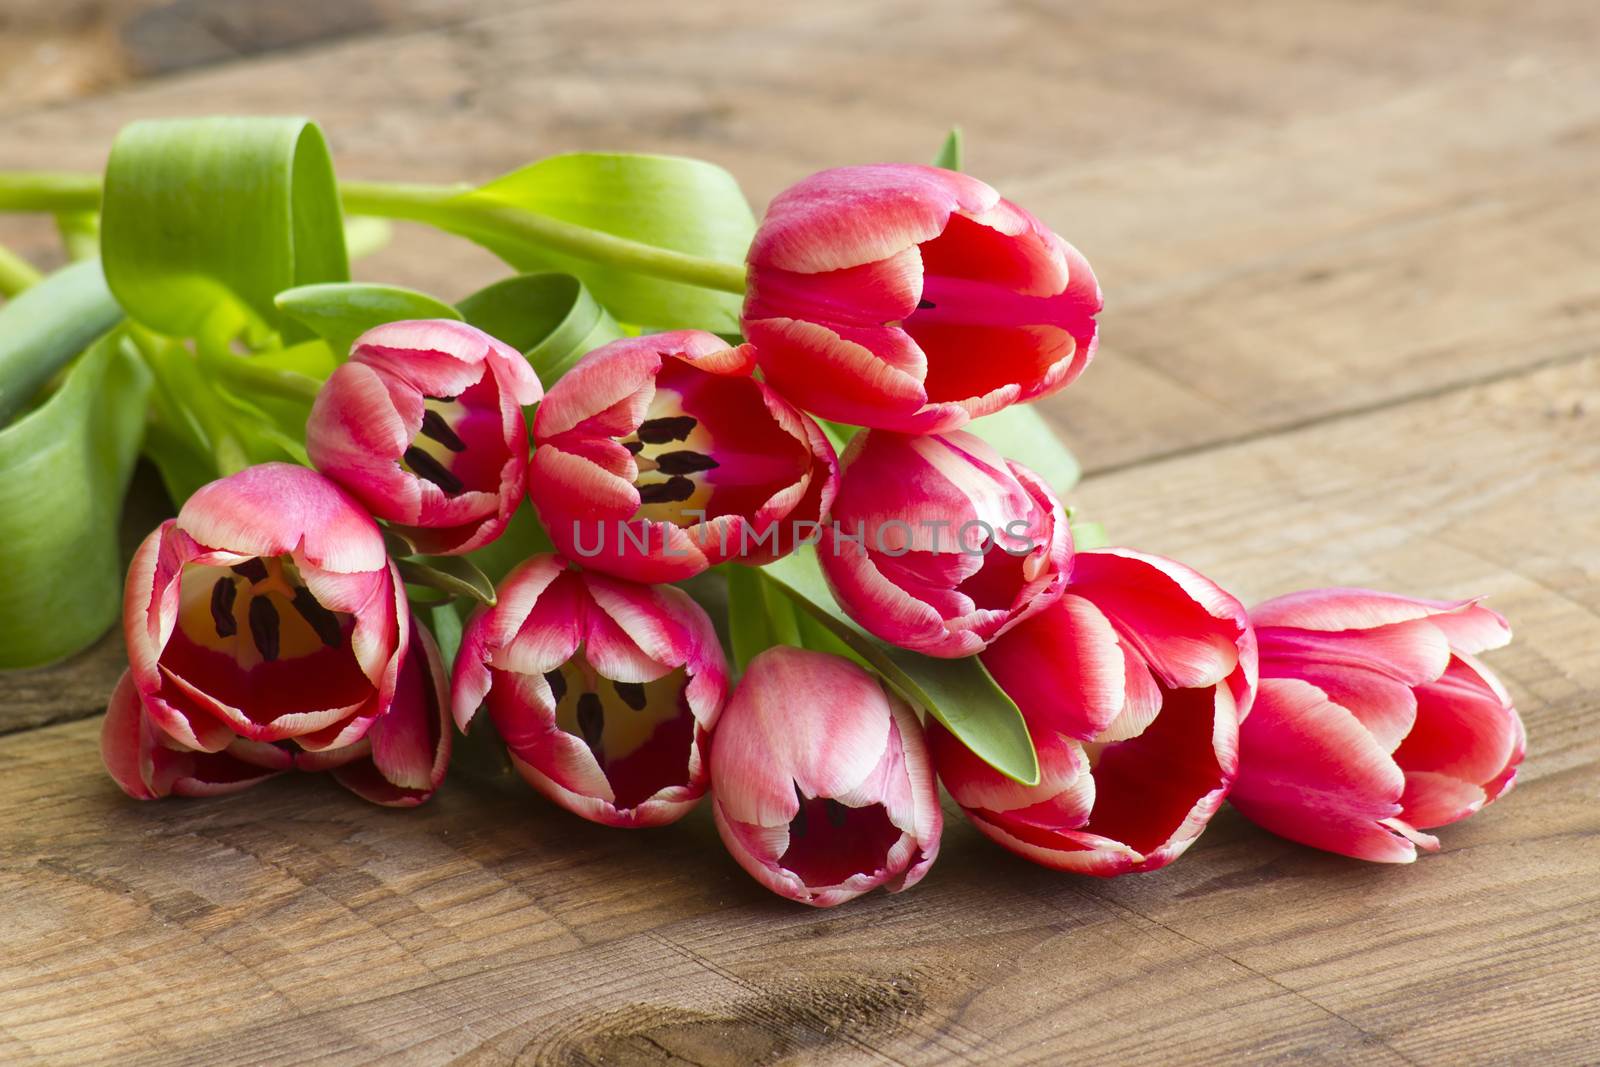 red tulips on wooden background by miradrozdowski